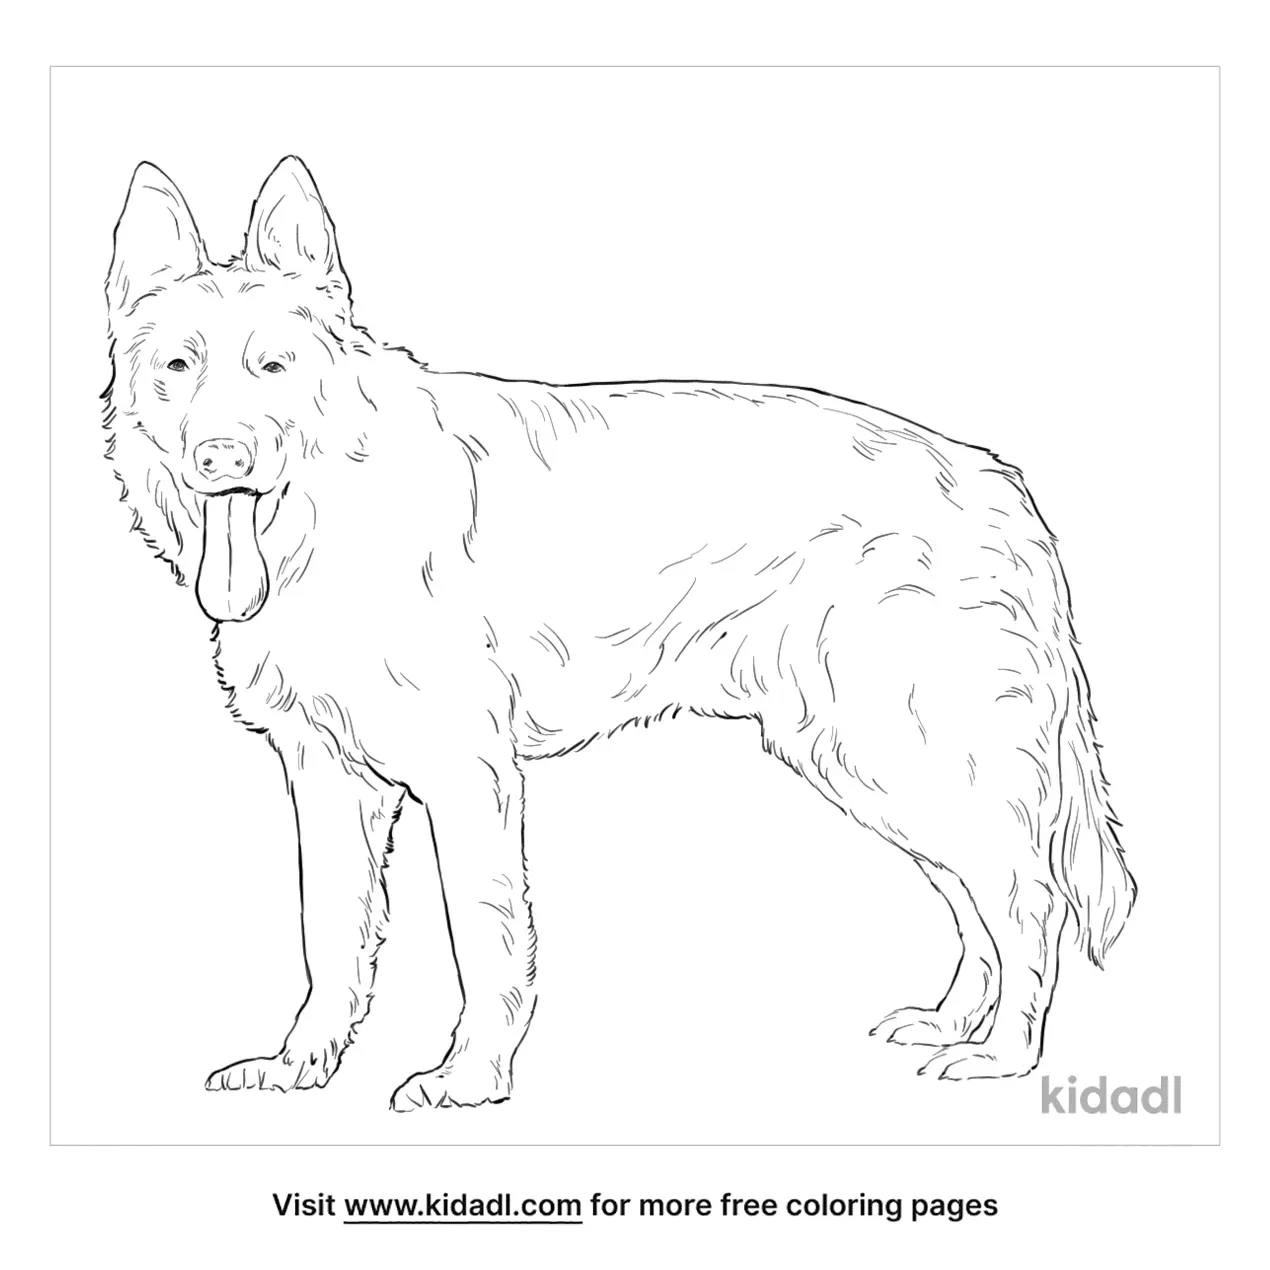 American Foxhound Coloring Page | Free Dogs Coloring Page | Kidadl